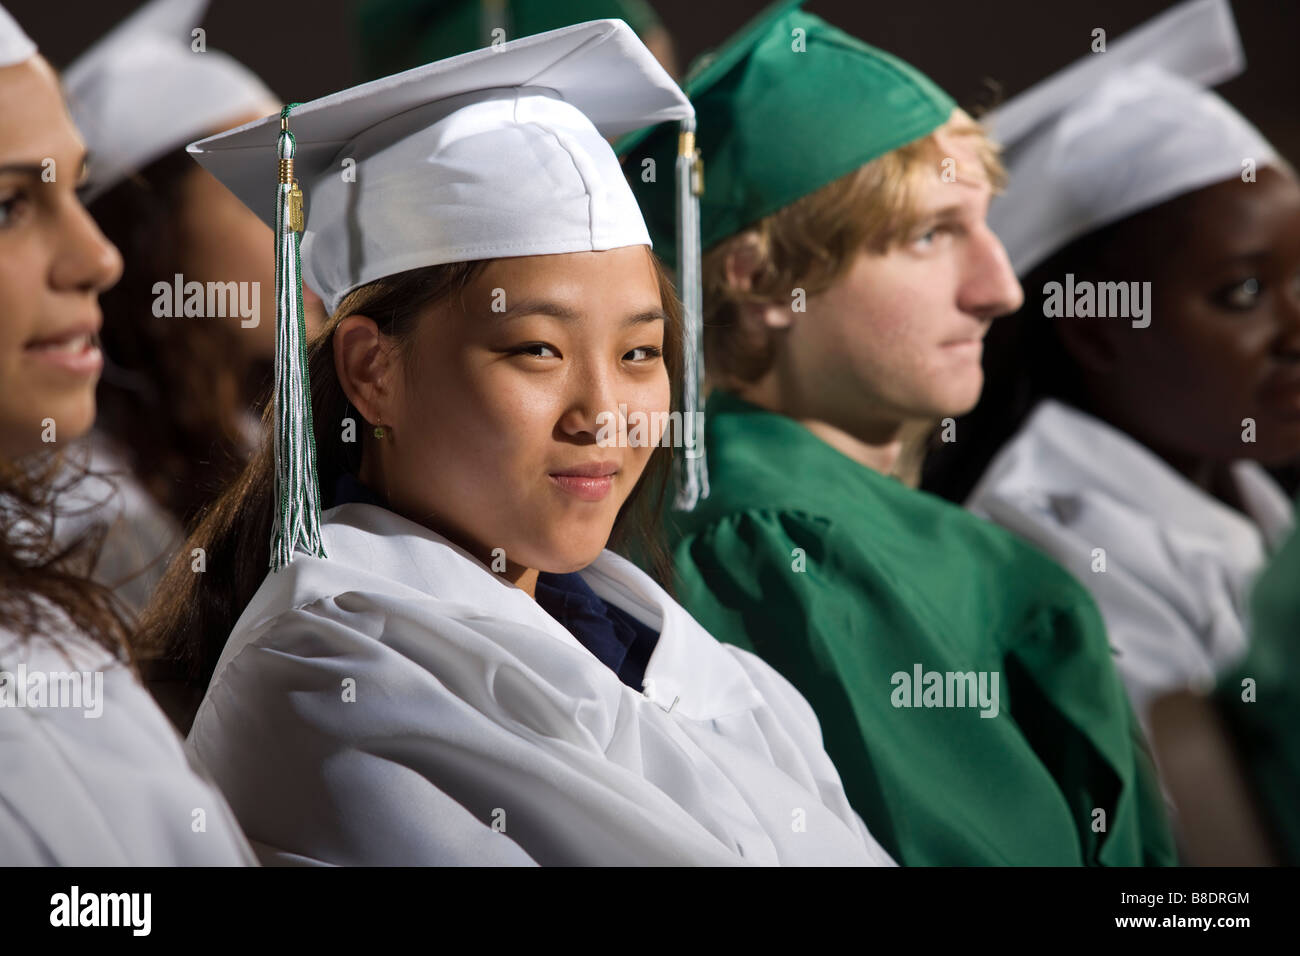 High school students in graduation gowns at commencement ceremony. Stock Photo